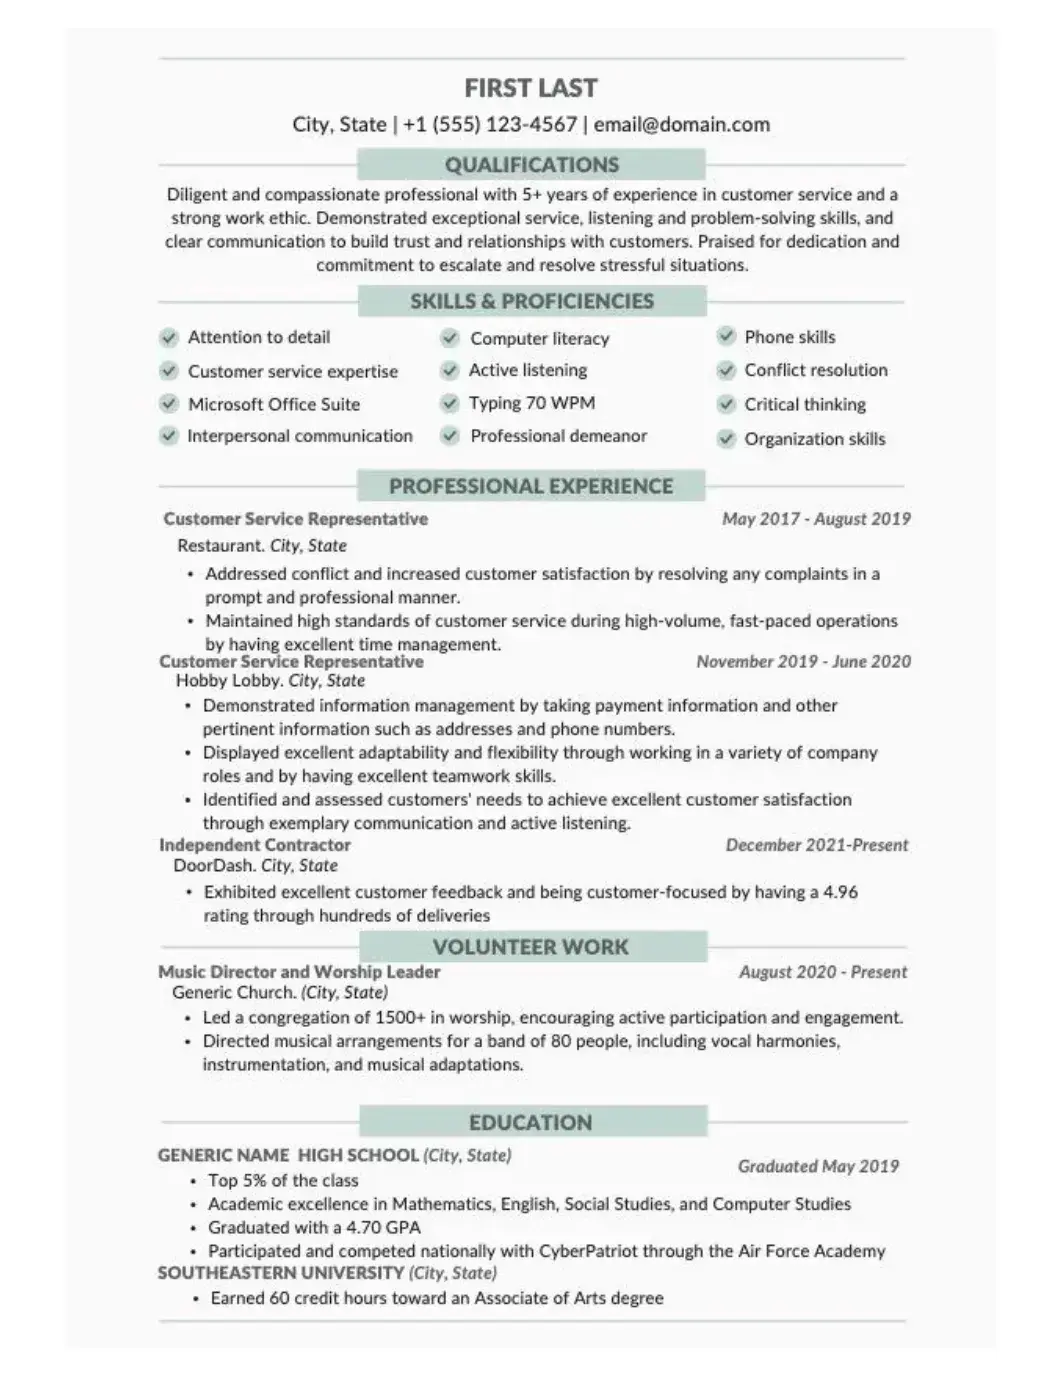 a detailed resume of a customer service representative with more than five years of experience.